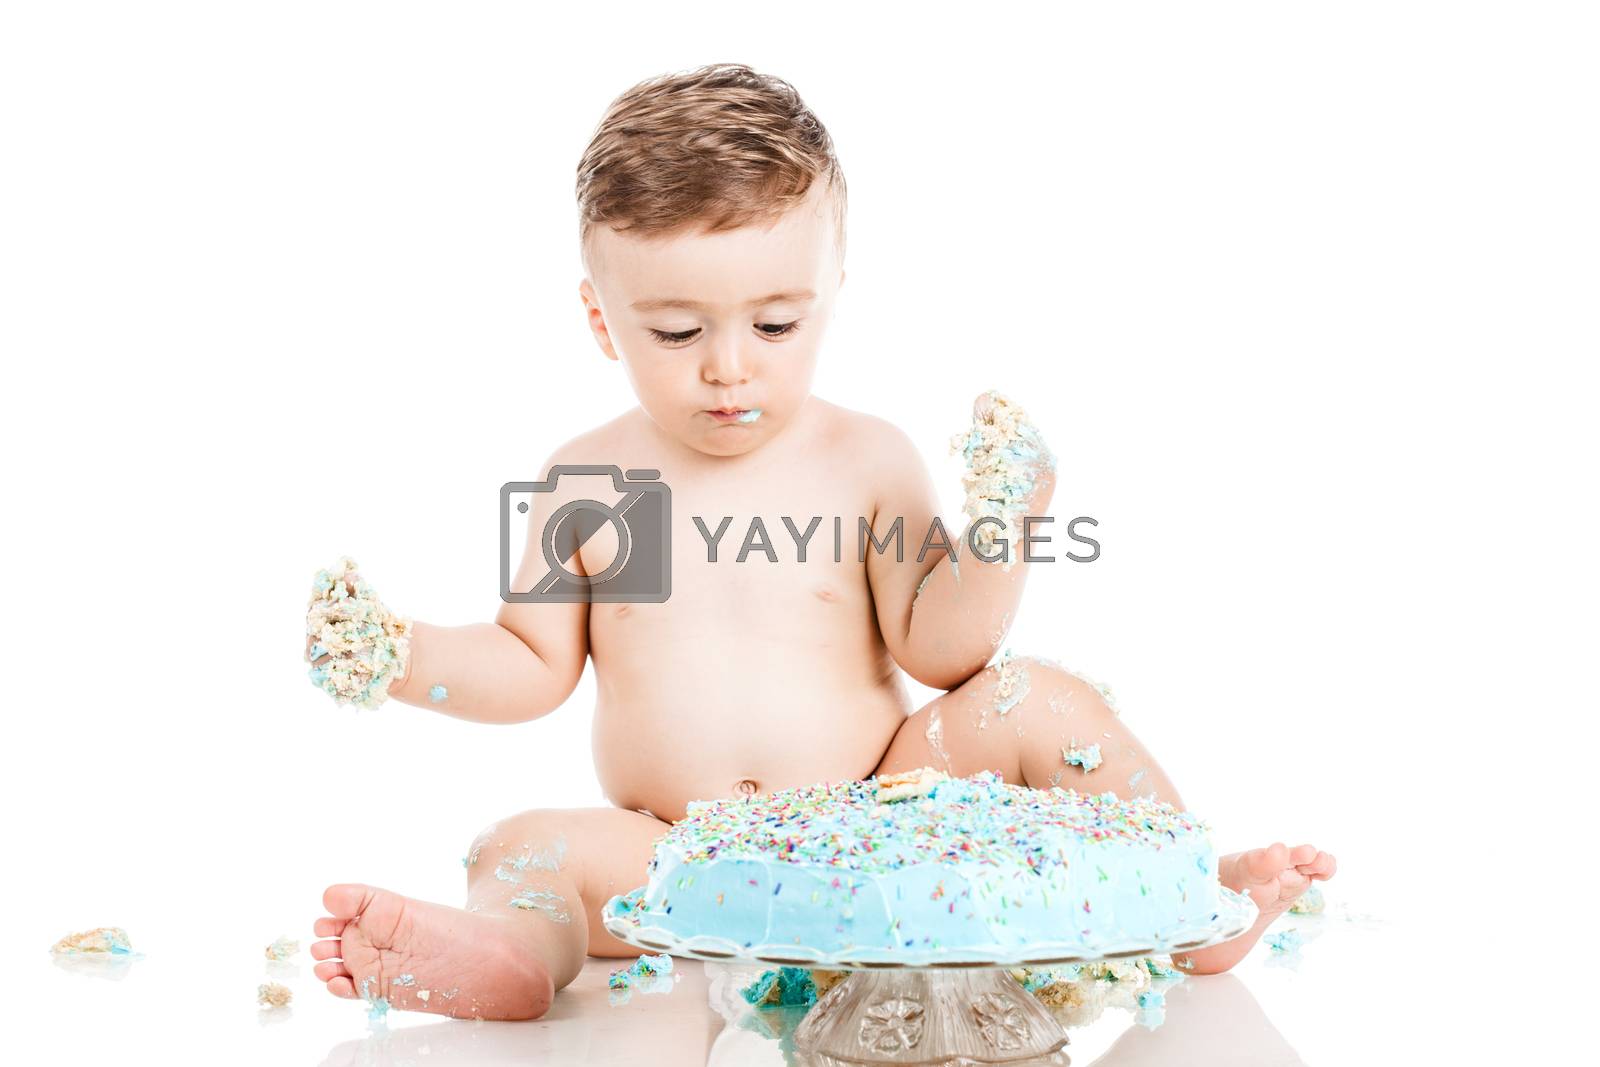 Royalty free image of baby boy with a cake by kokimk